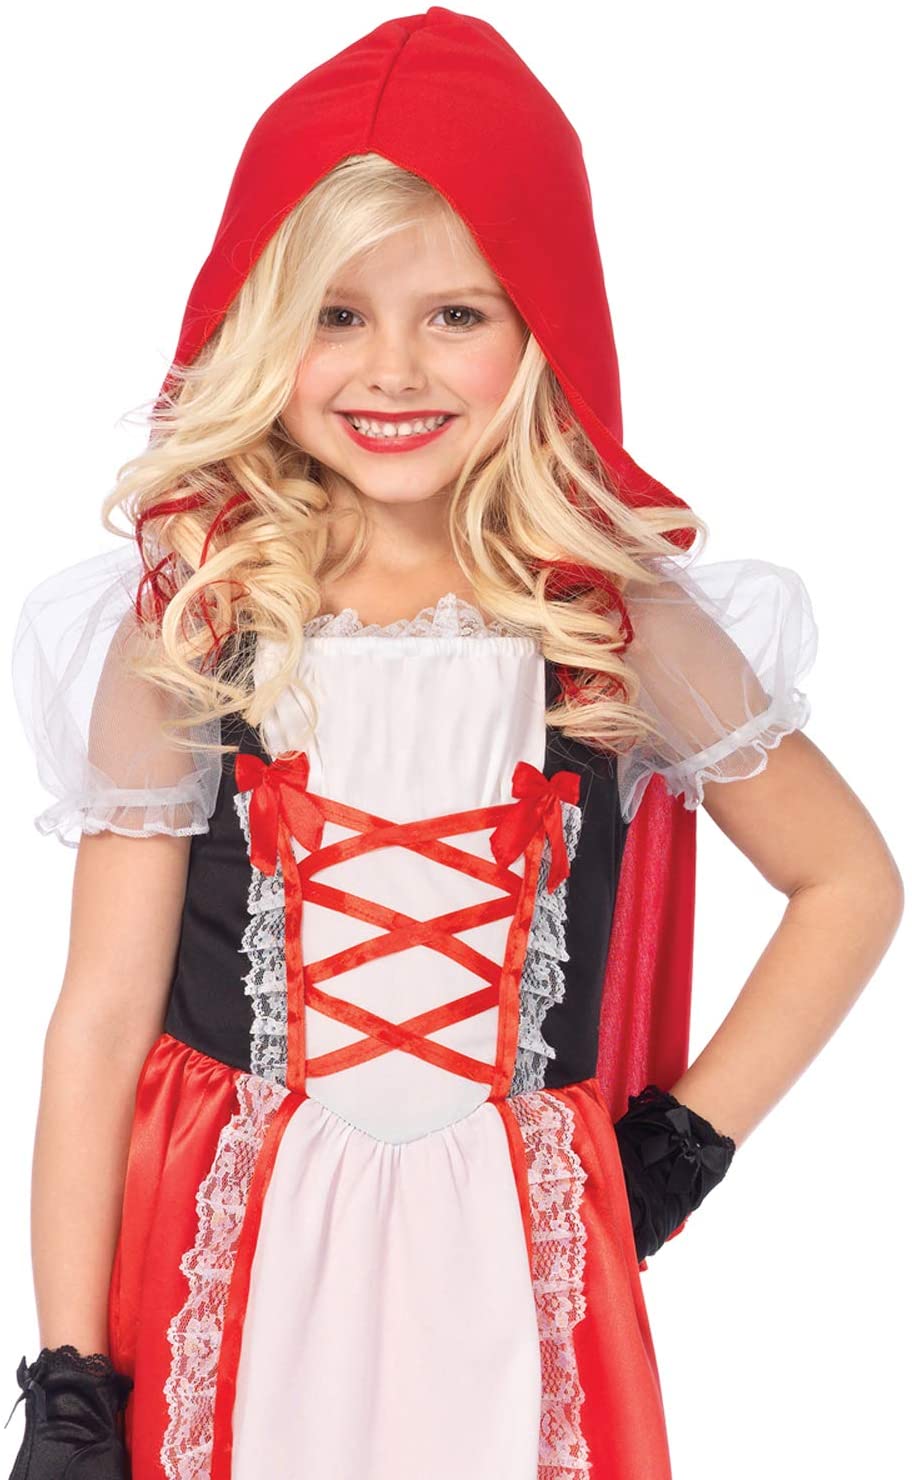 Red Riding Hood Costume Child Small 4 - 6